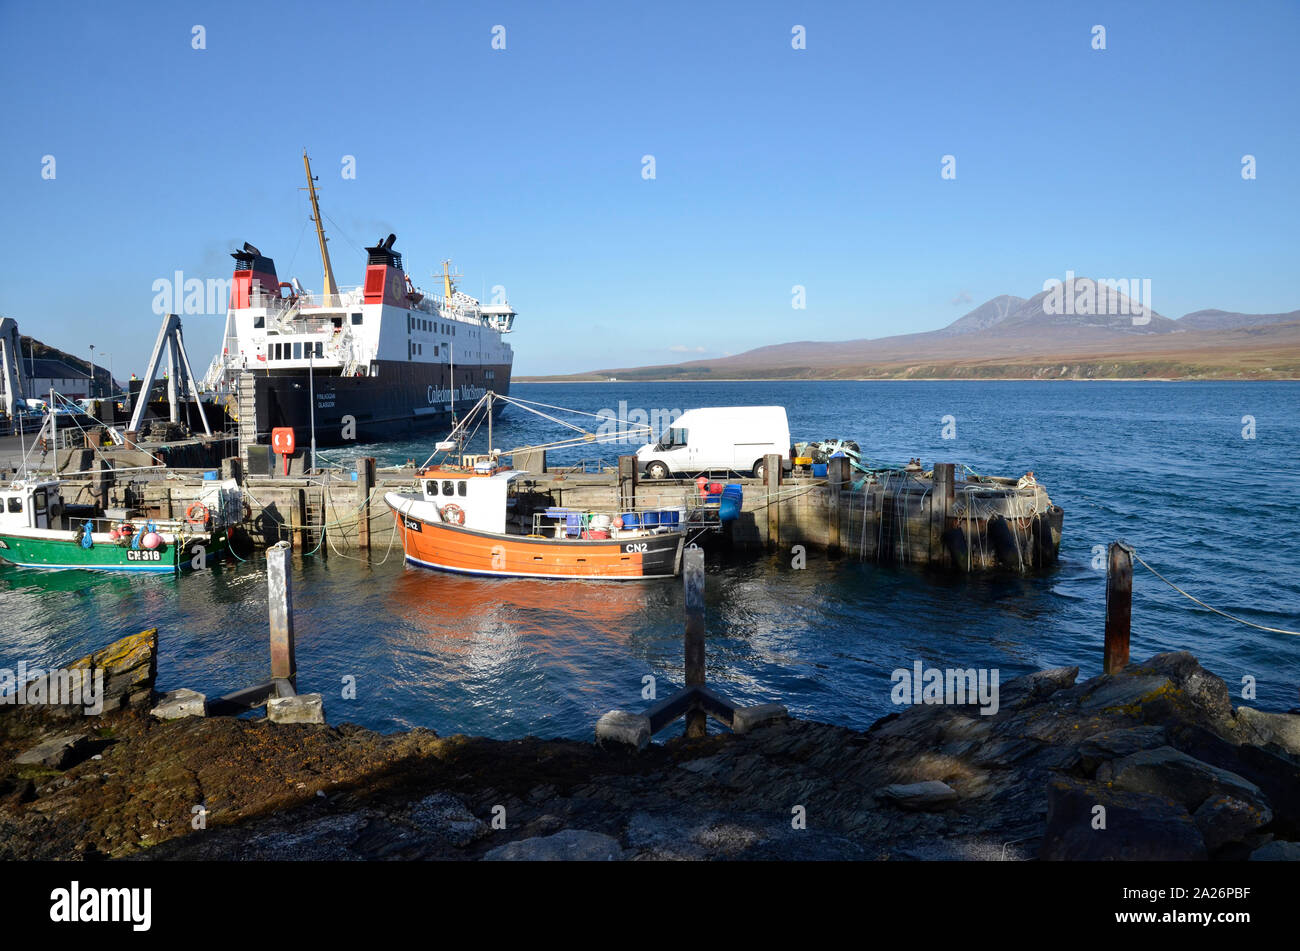 MV Finlaggan, Caledonian MacBrayne island ferry at Port Askaig on the Scottish Island of Islay. The Paps of Jura hills can be seen in the background. Stock Photo